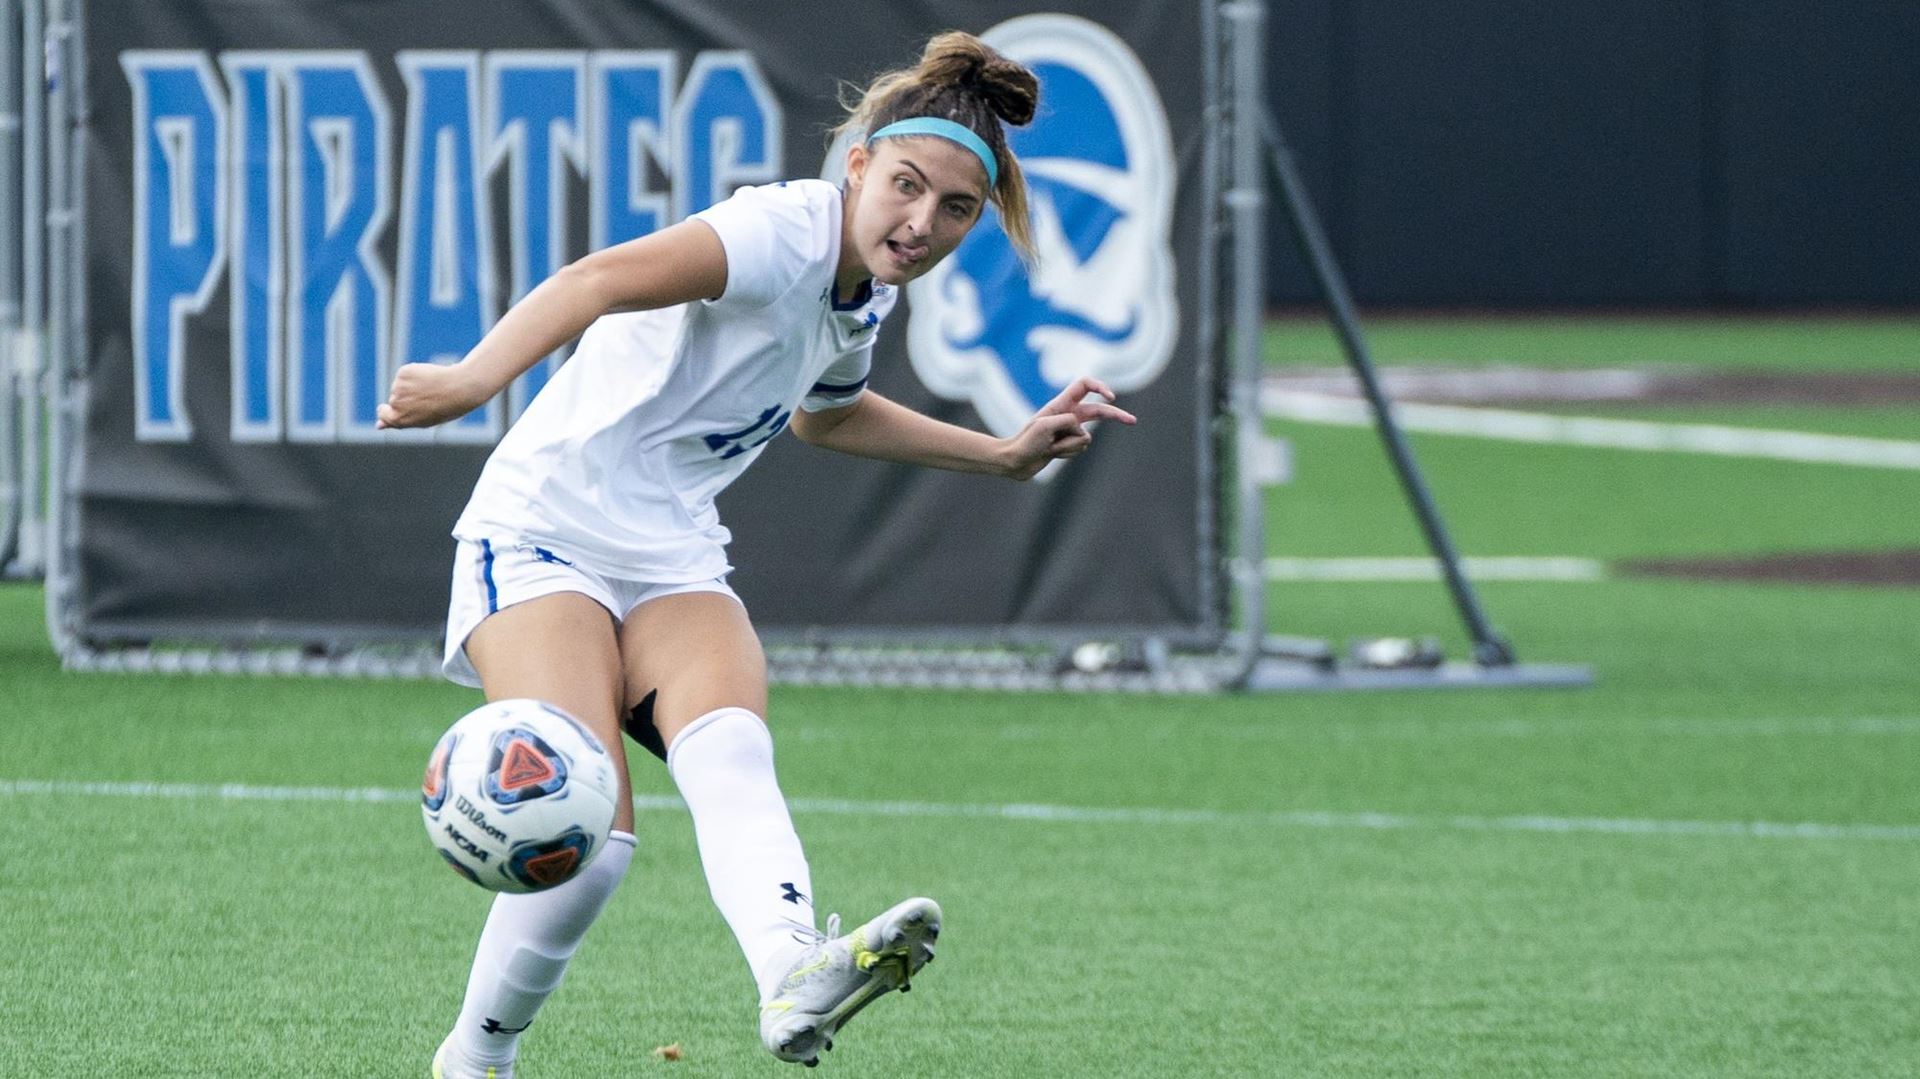 A Seton Hall women's soccer player dribbles the ball during a home game.